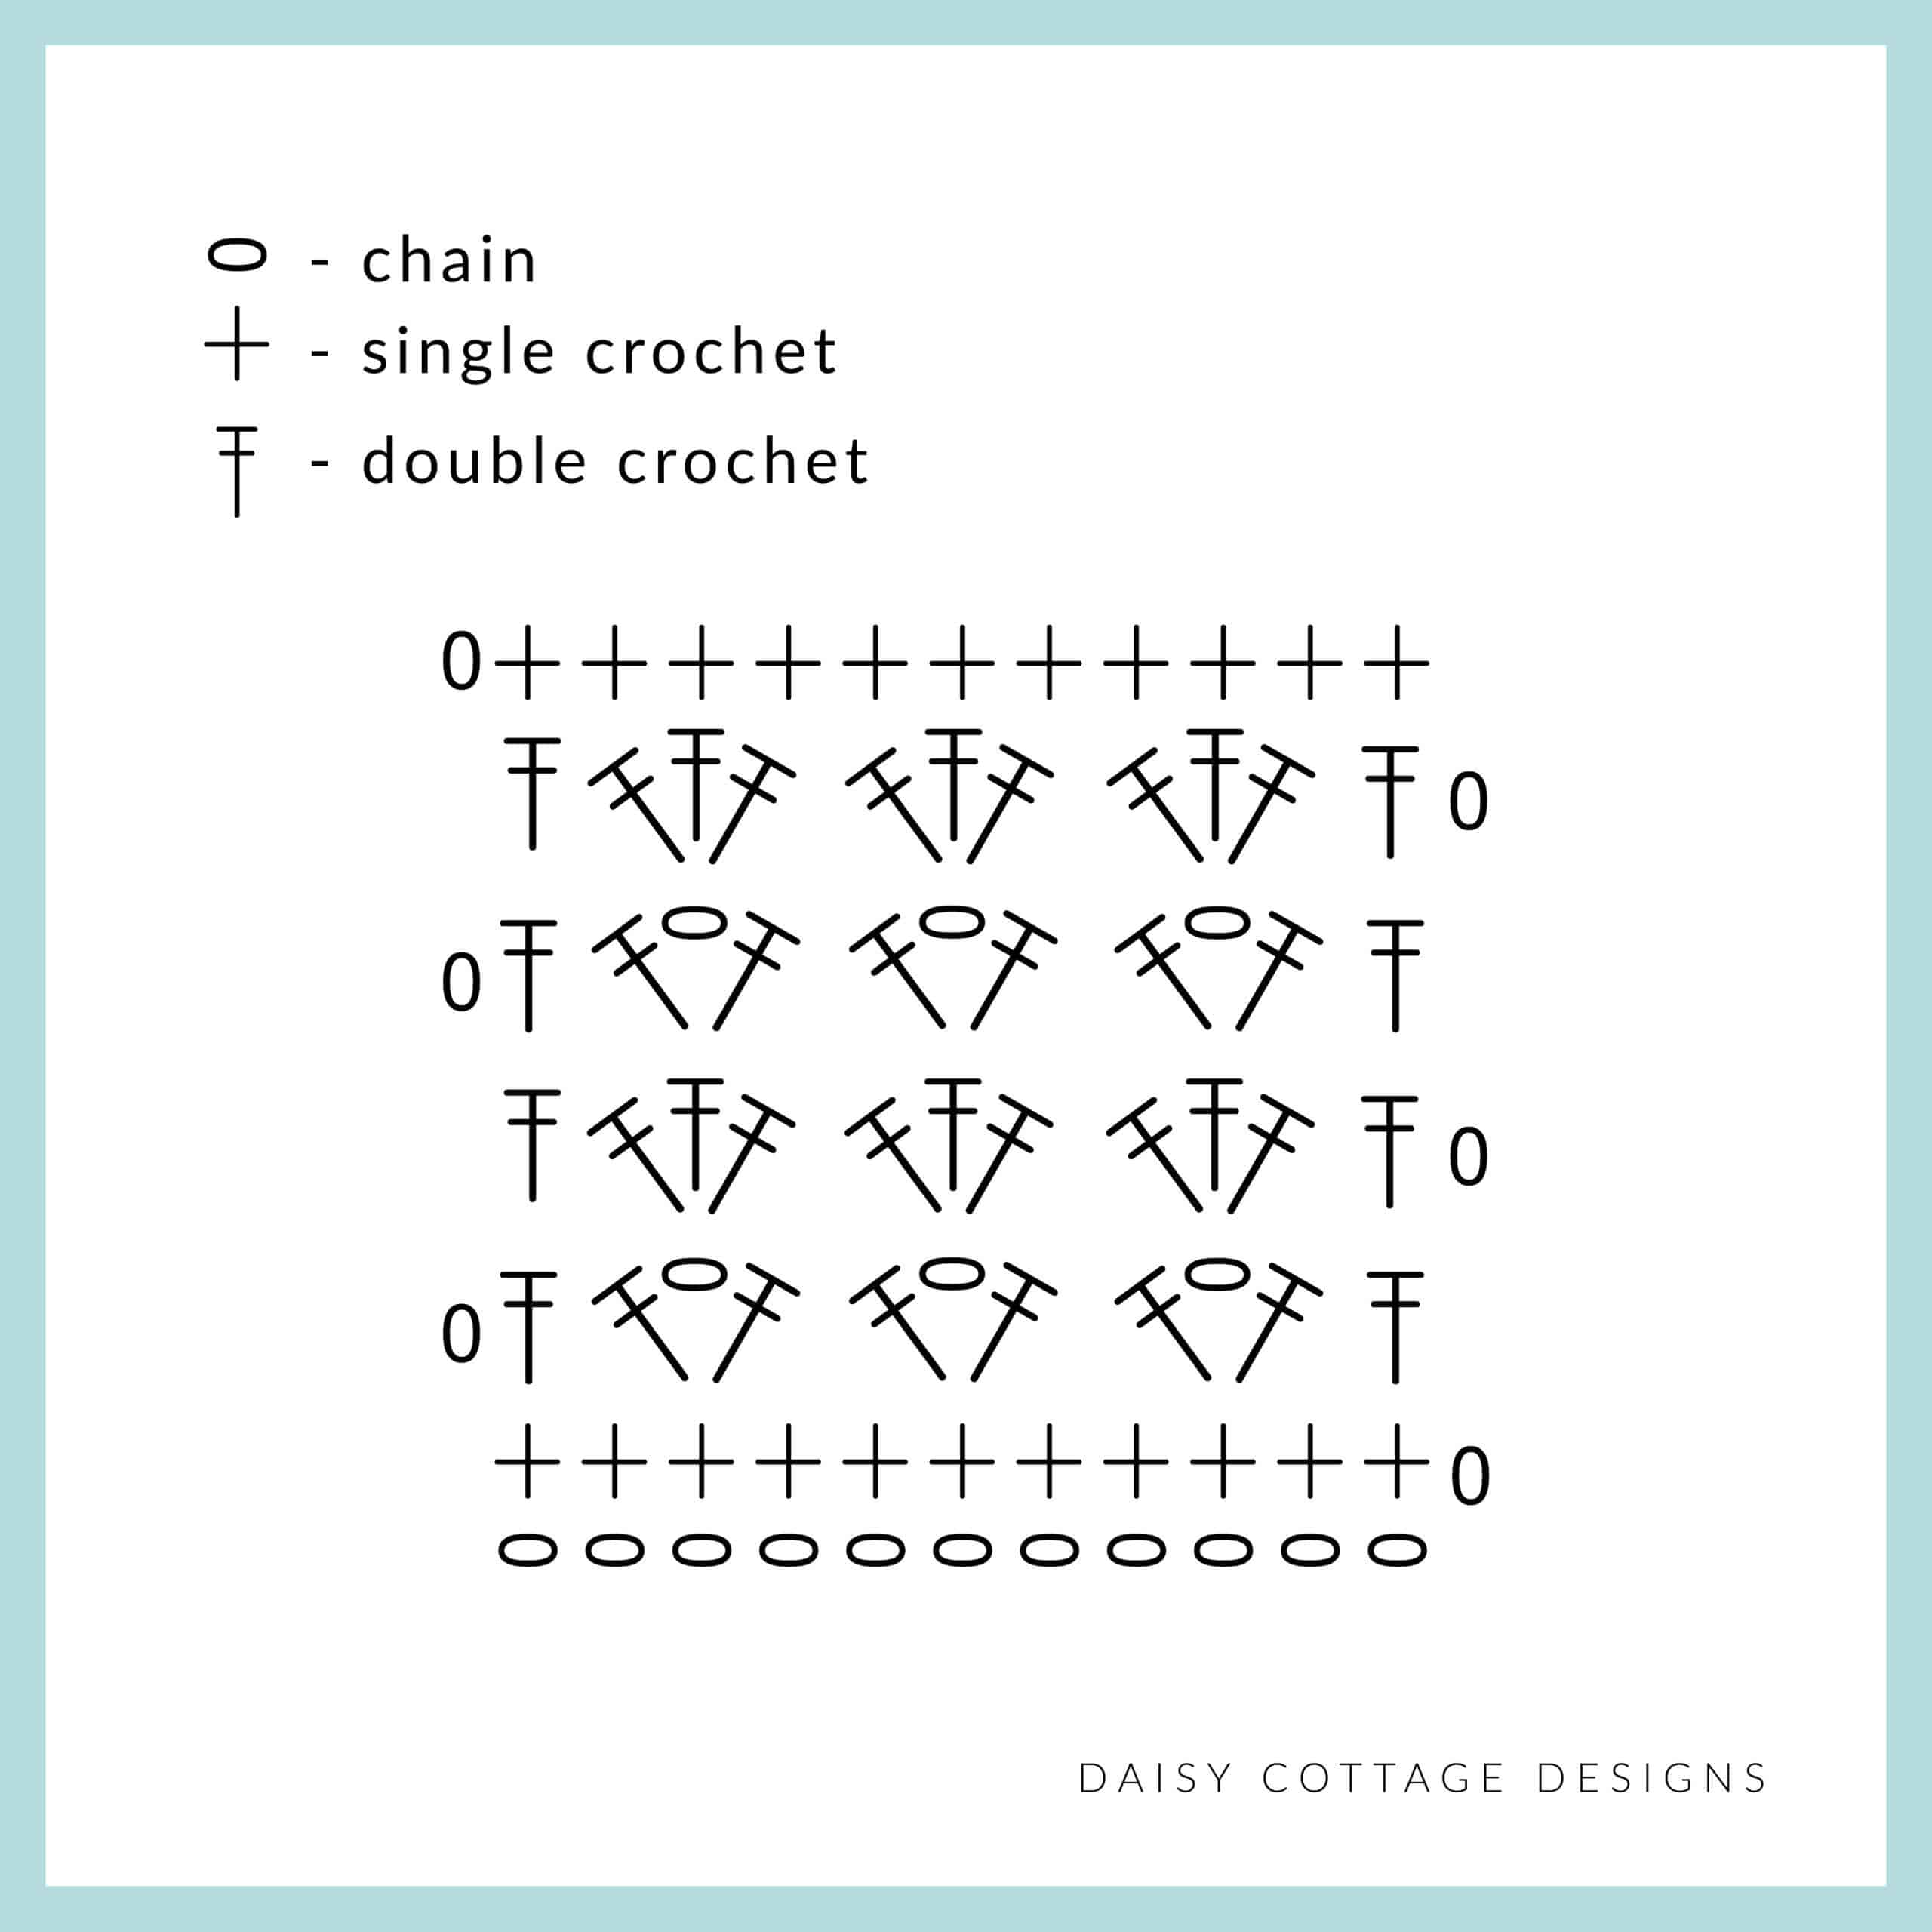 Use this chart to crochet a quick blanket from Daisy Cottage Designs